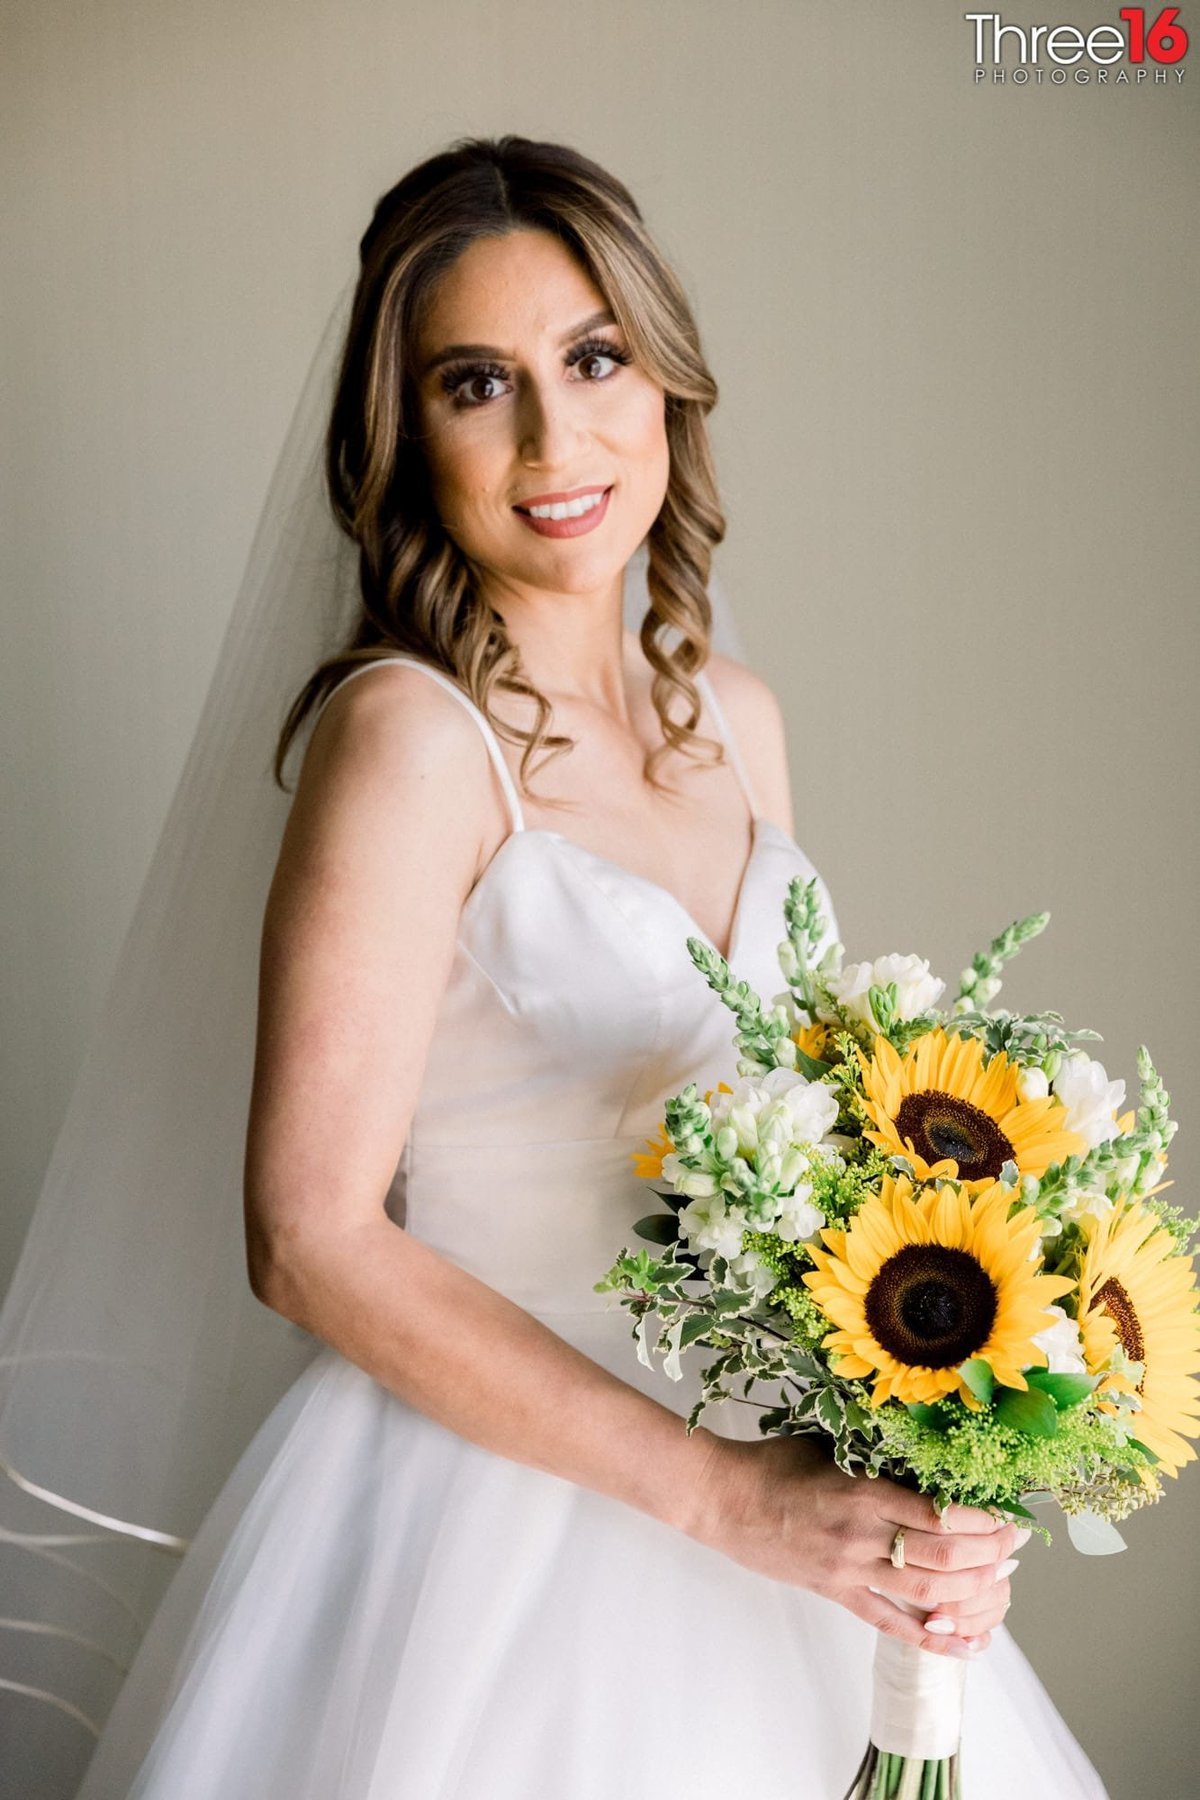 Pretty Bride smiles as she poses for photos with her sunflower bouquet